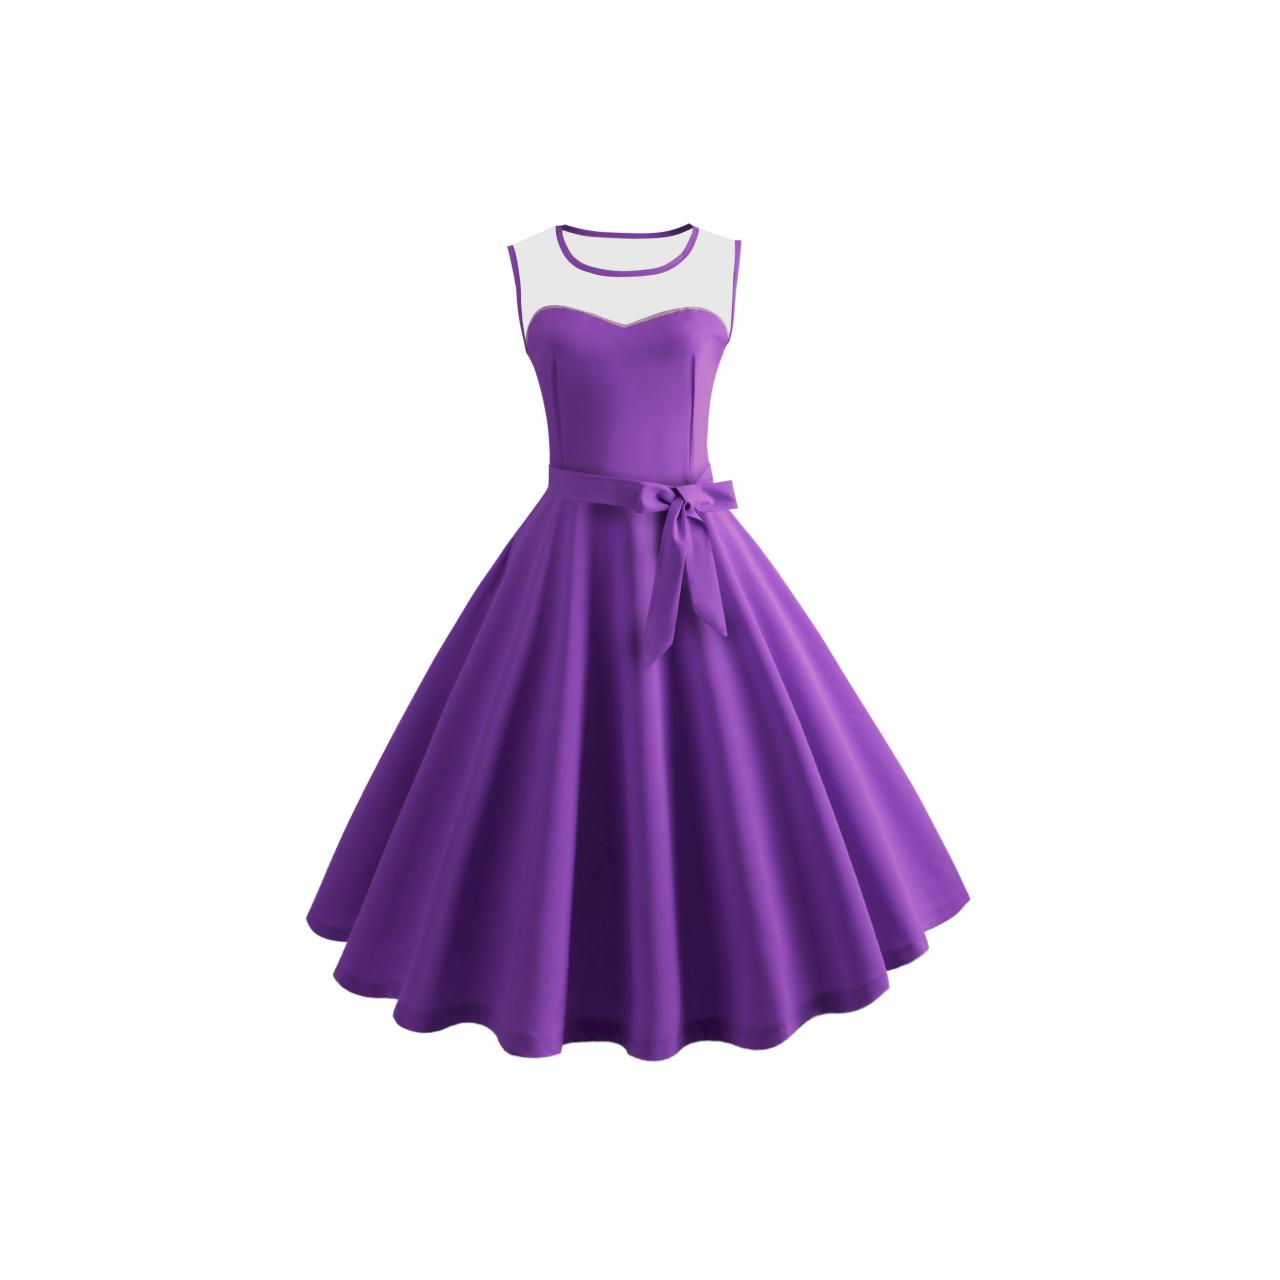 Women Sleeveless Casual Dress Mesh Patchwork O-Neck Belted A-Line Work Party Dress purple